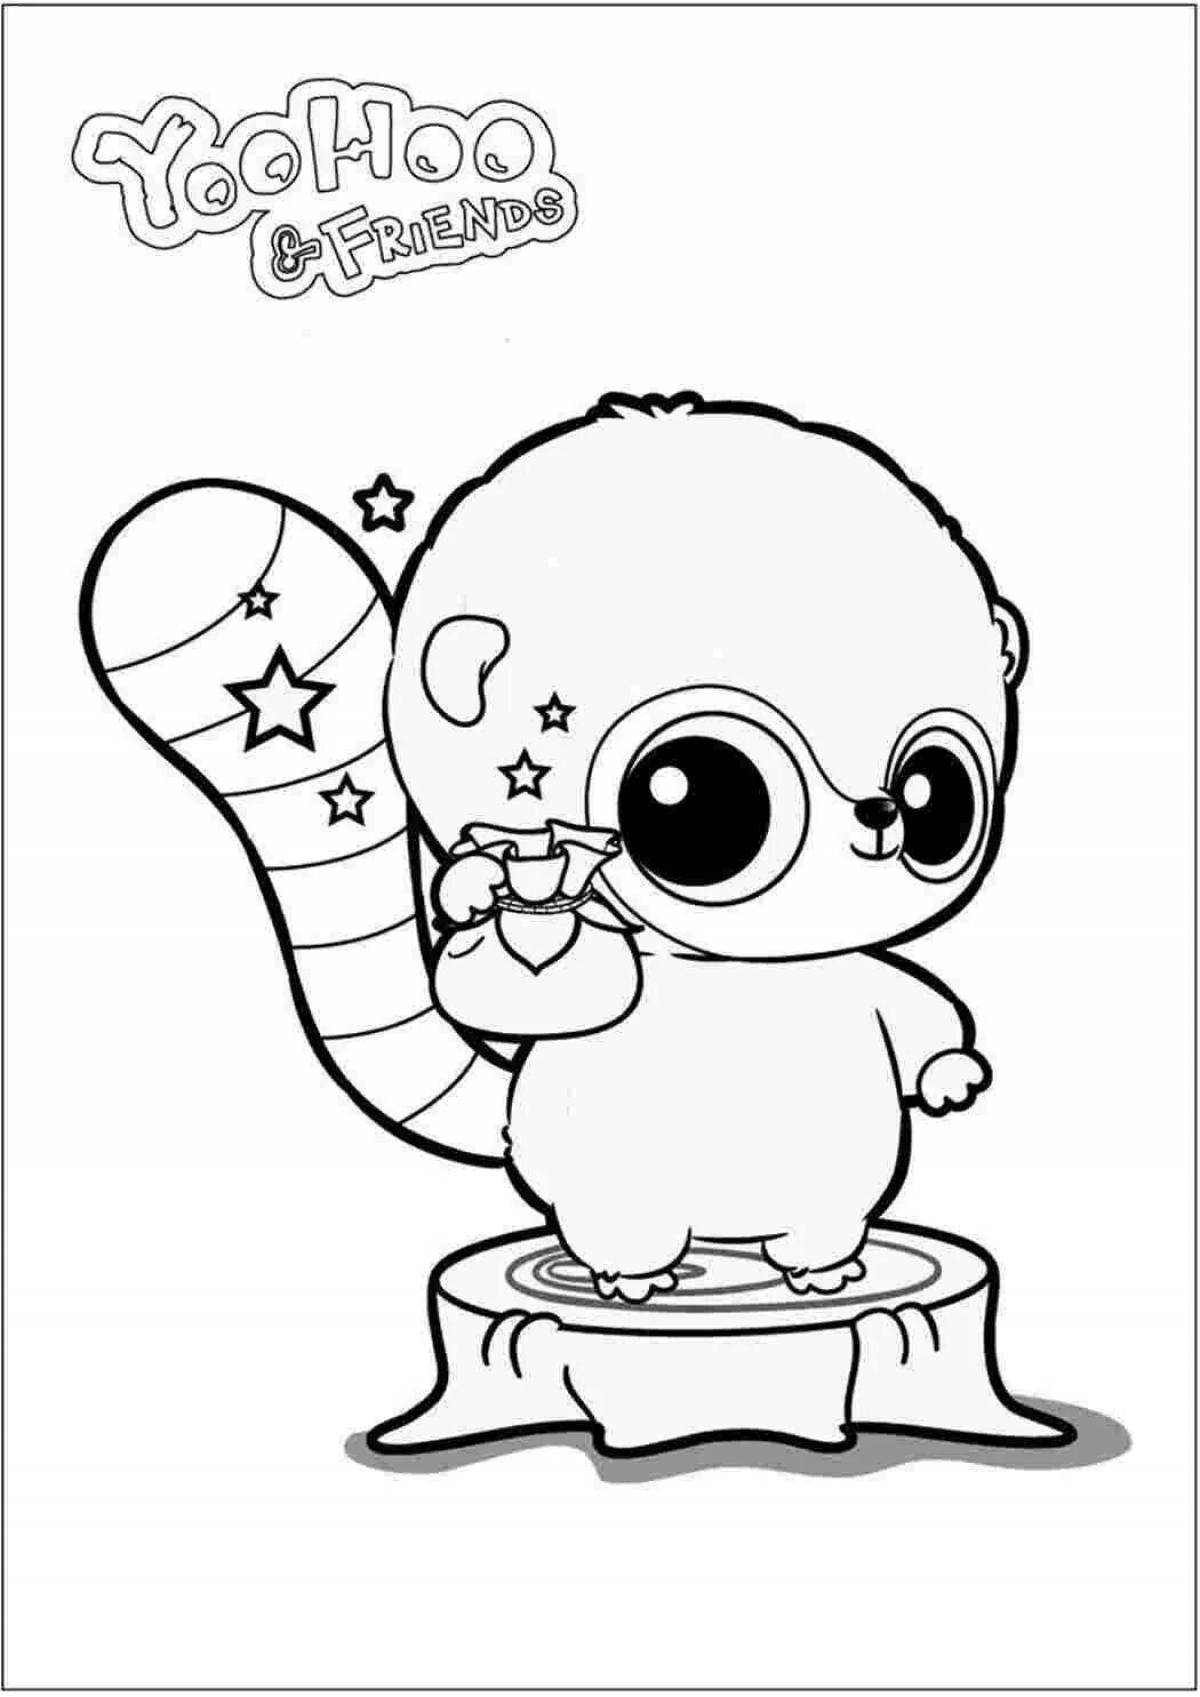 Cute coloring pages cute toys